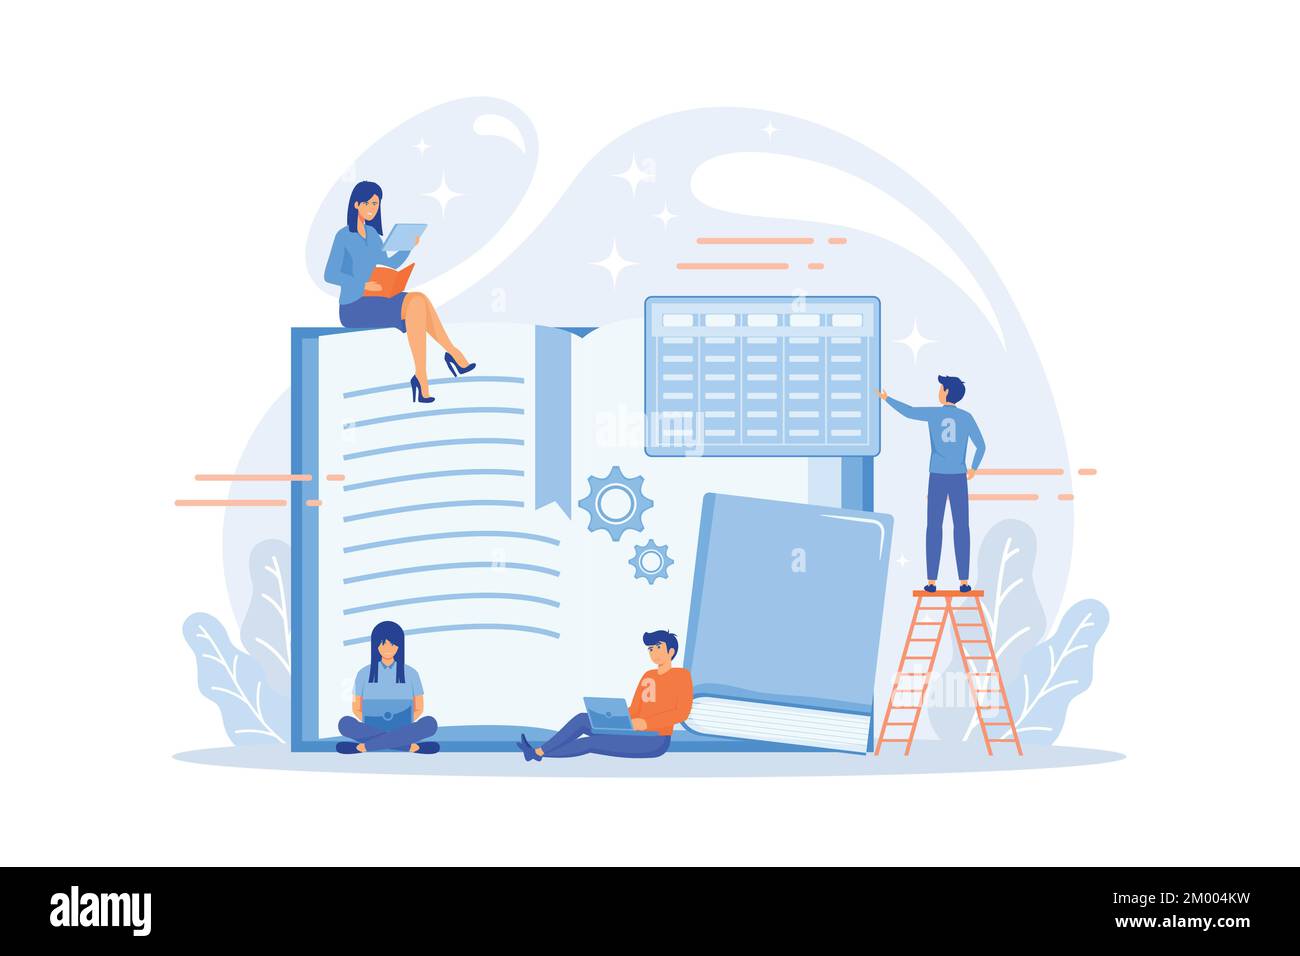 Preparing test together. Learning and studying with friends. Effective revision, revision timetables and planning, how to revise for exams concept. fl Stock Vector